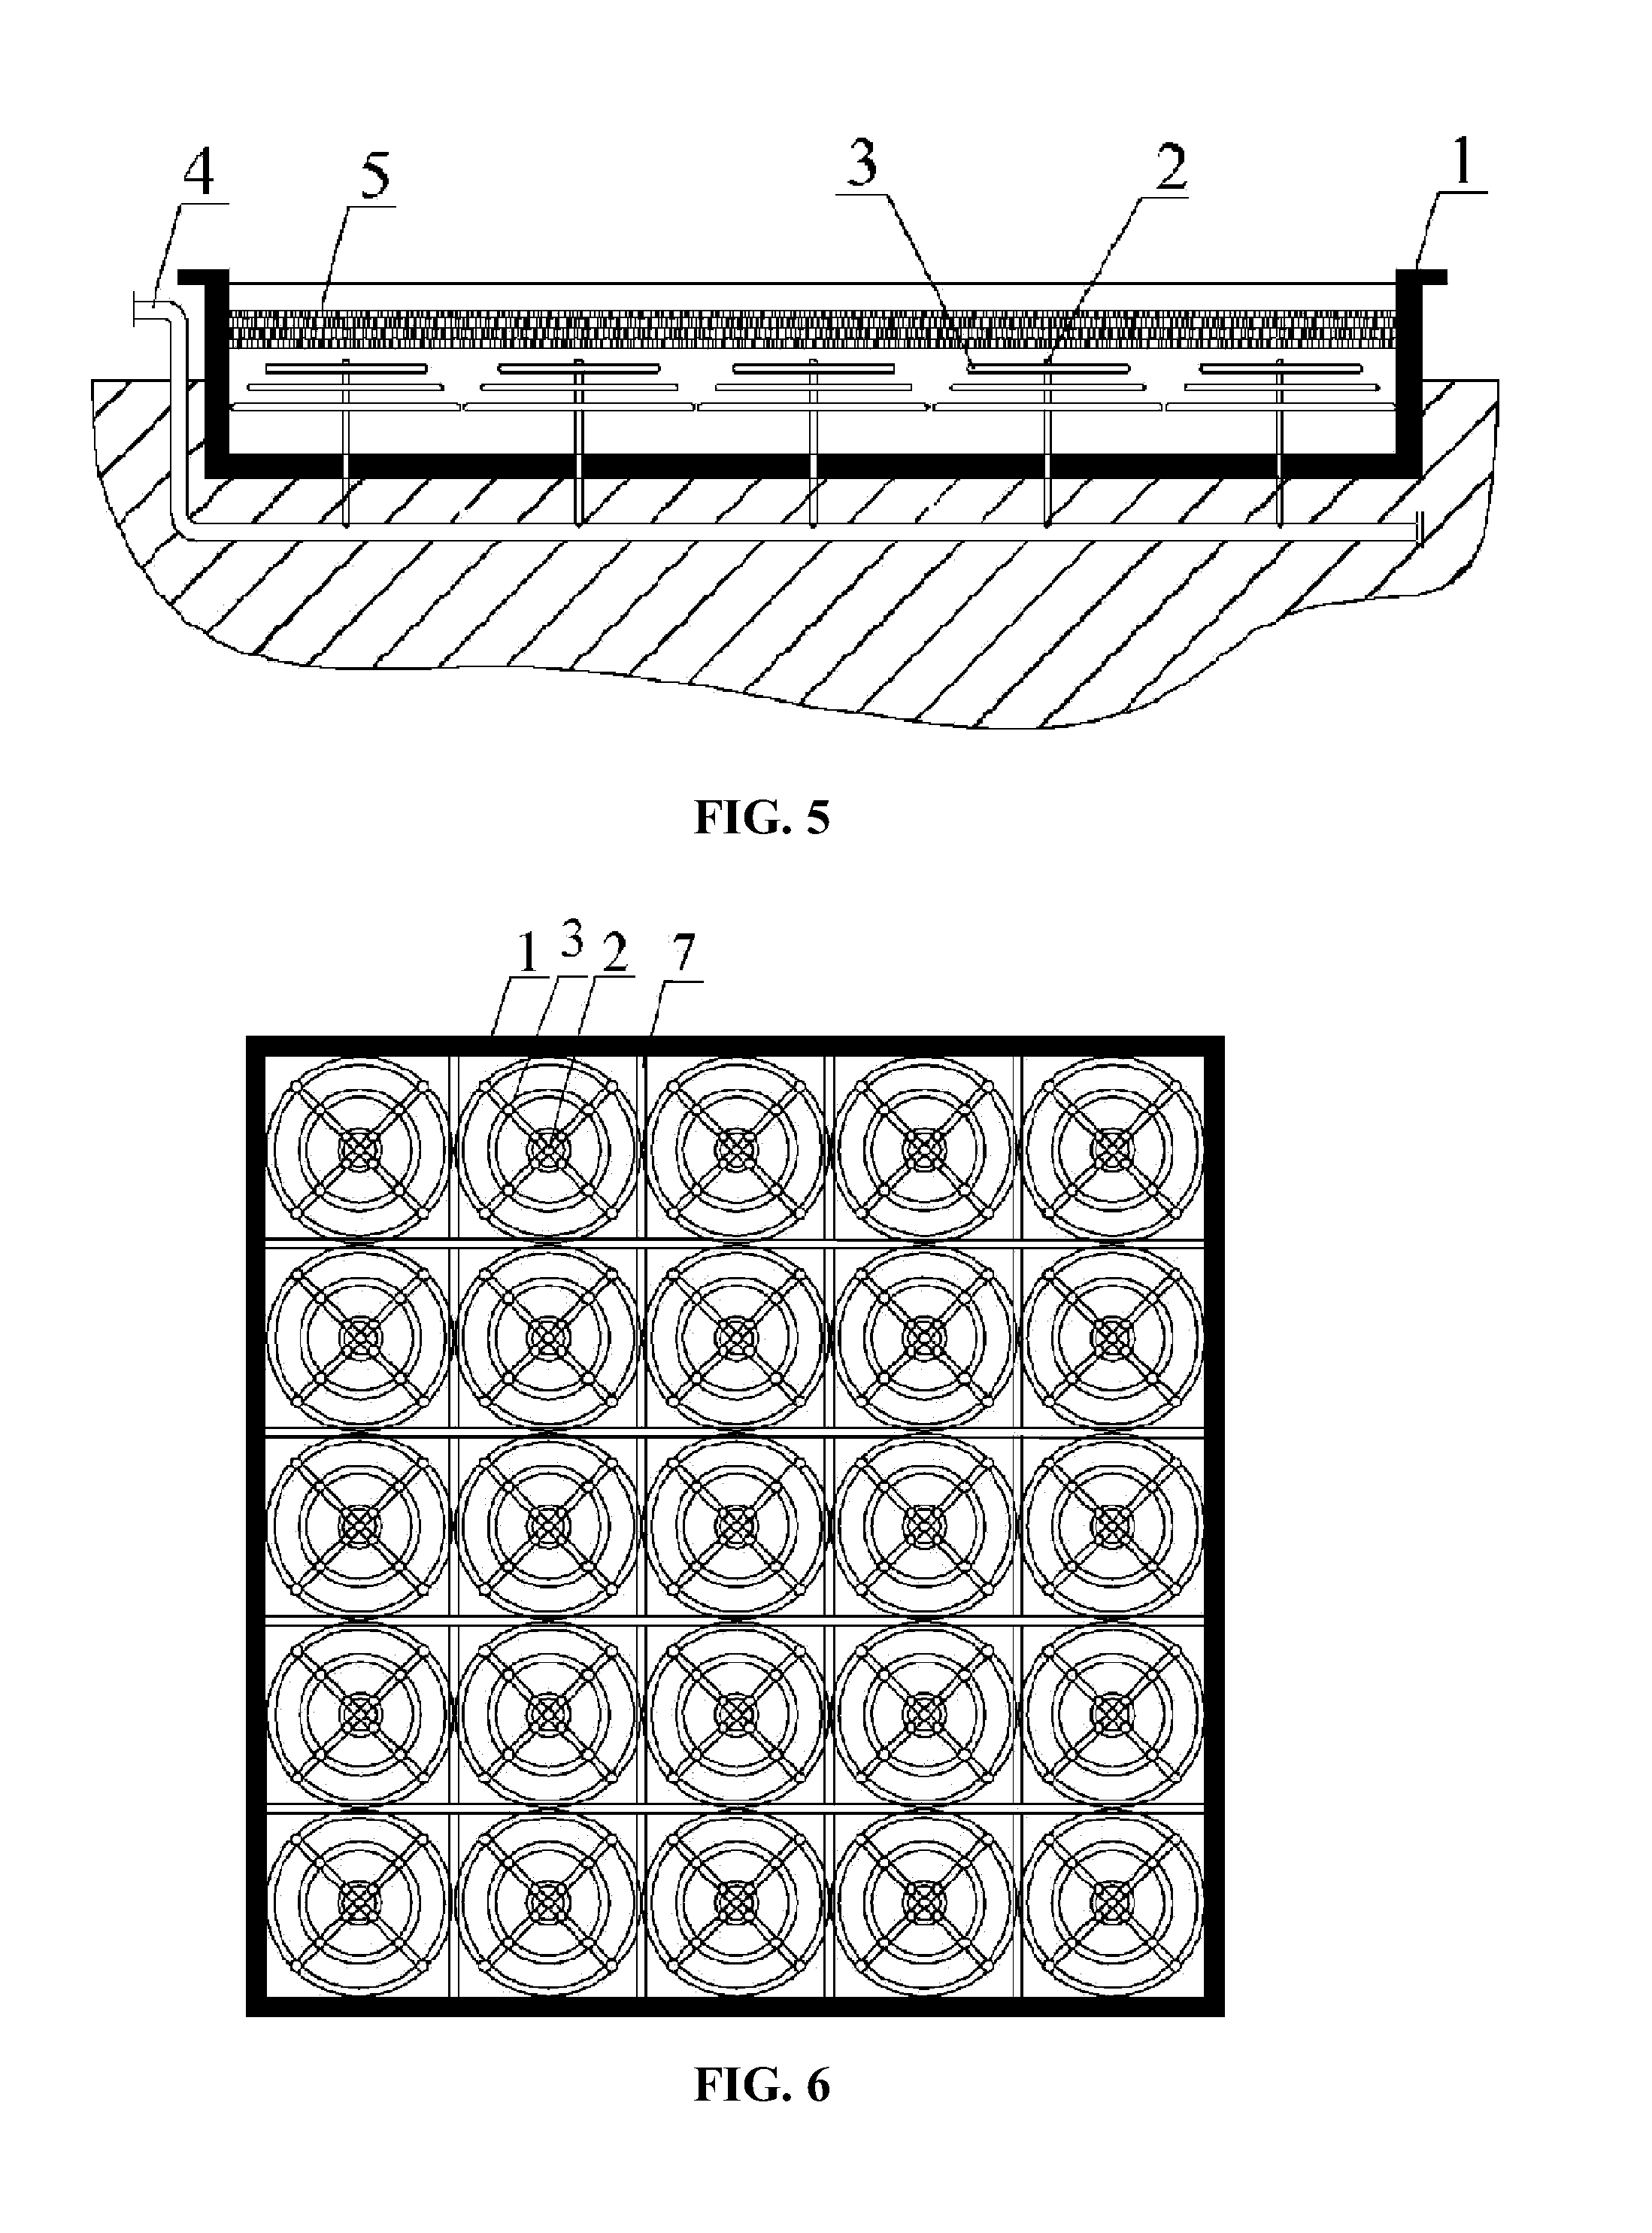 Method for preparing surface-modified nanosilicon dioxide from rice hulls